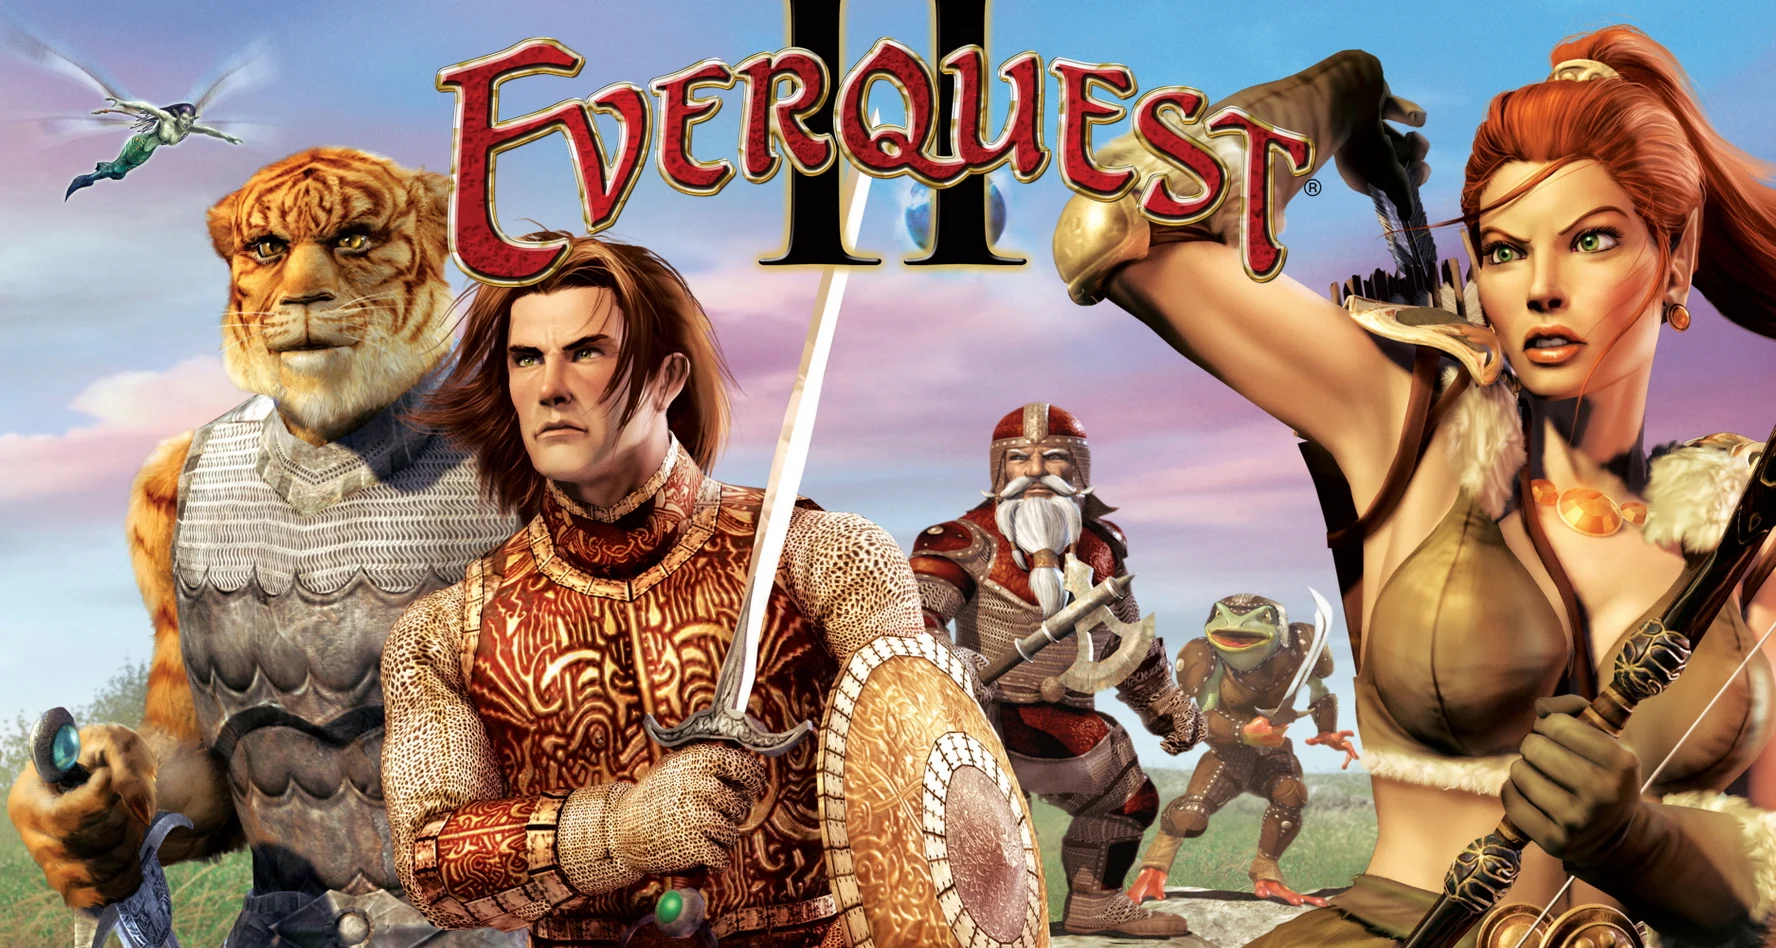 Everquest 2 Release 2022 Roadmap with Plans for New TLE Server, Expansion, and 64-Bit Client 5